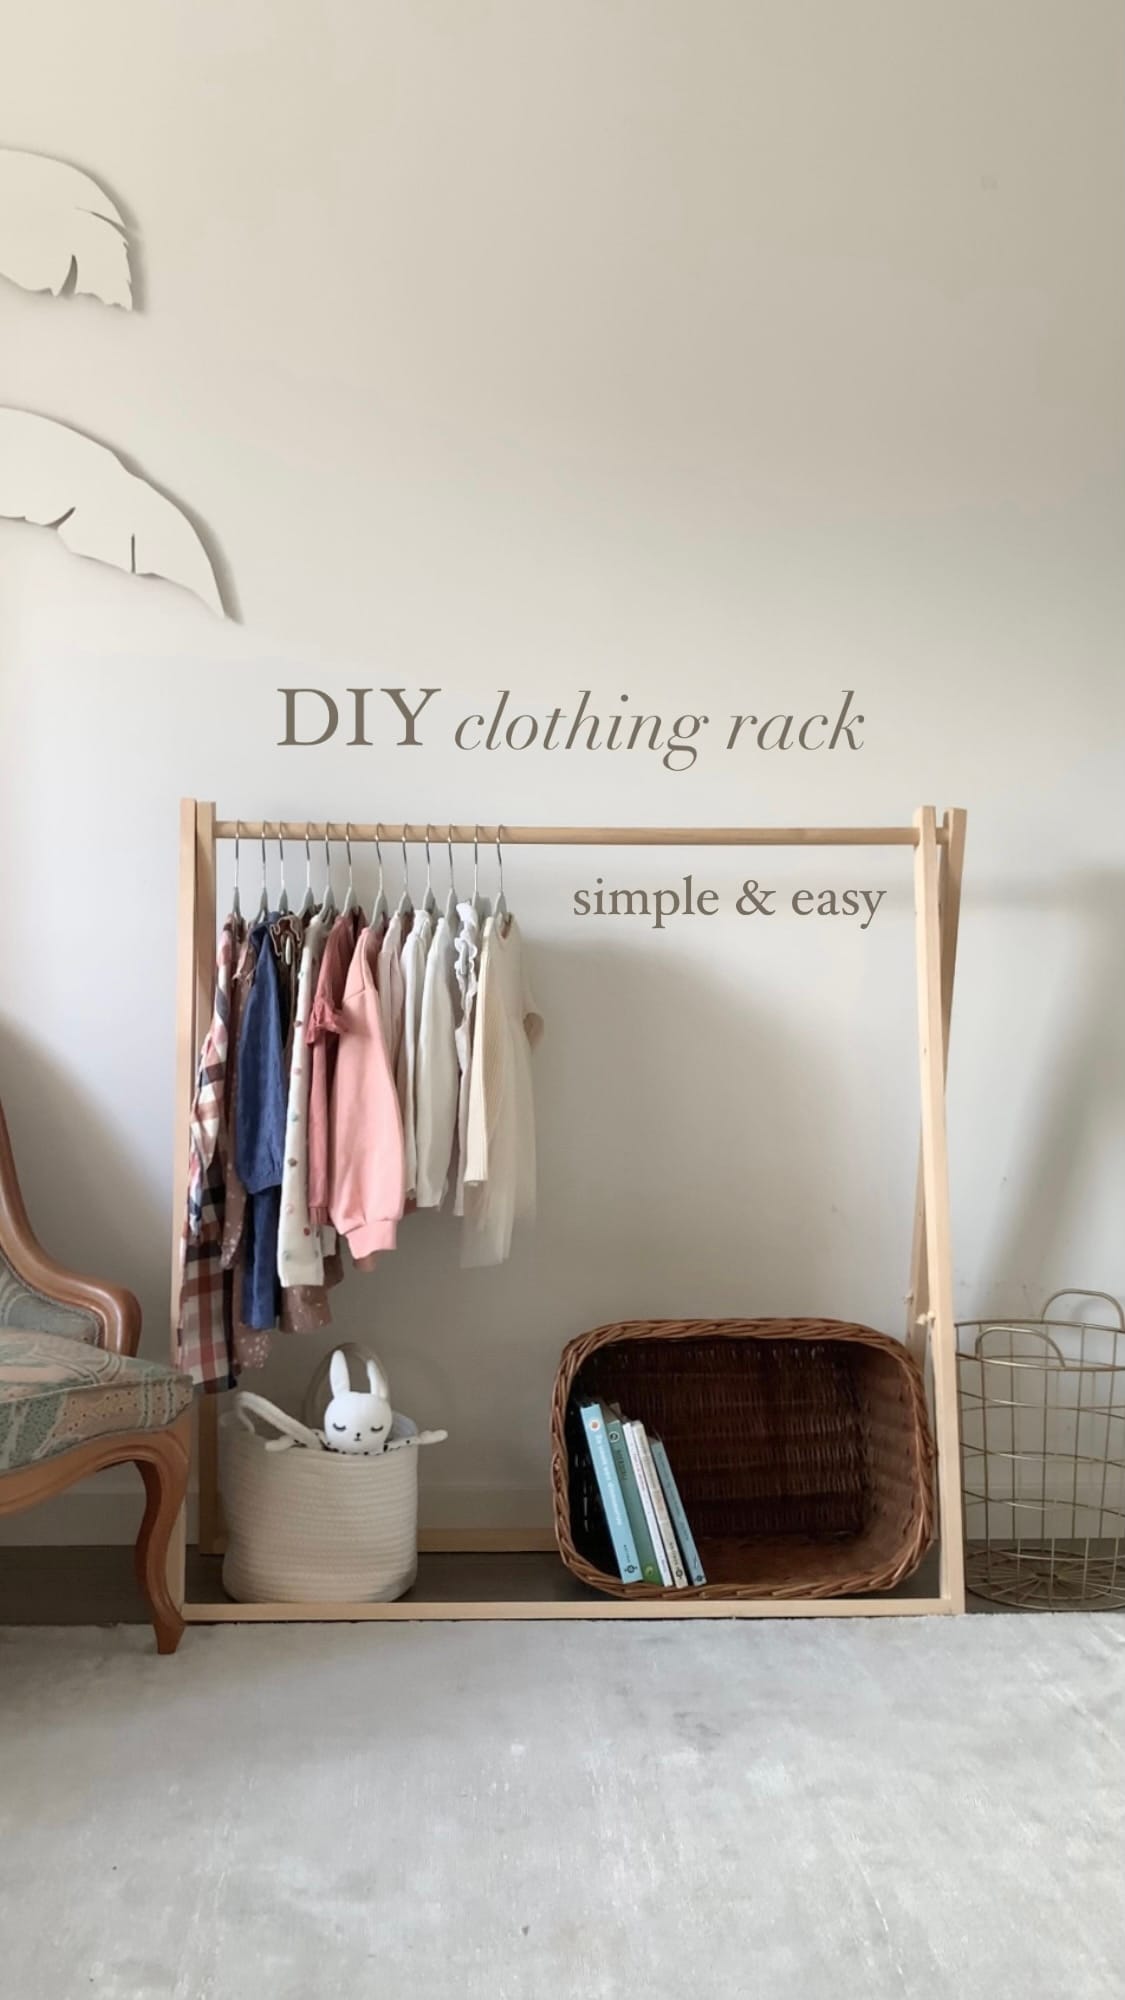 DIY clothing rack⎮quick, easy and budget friendly